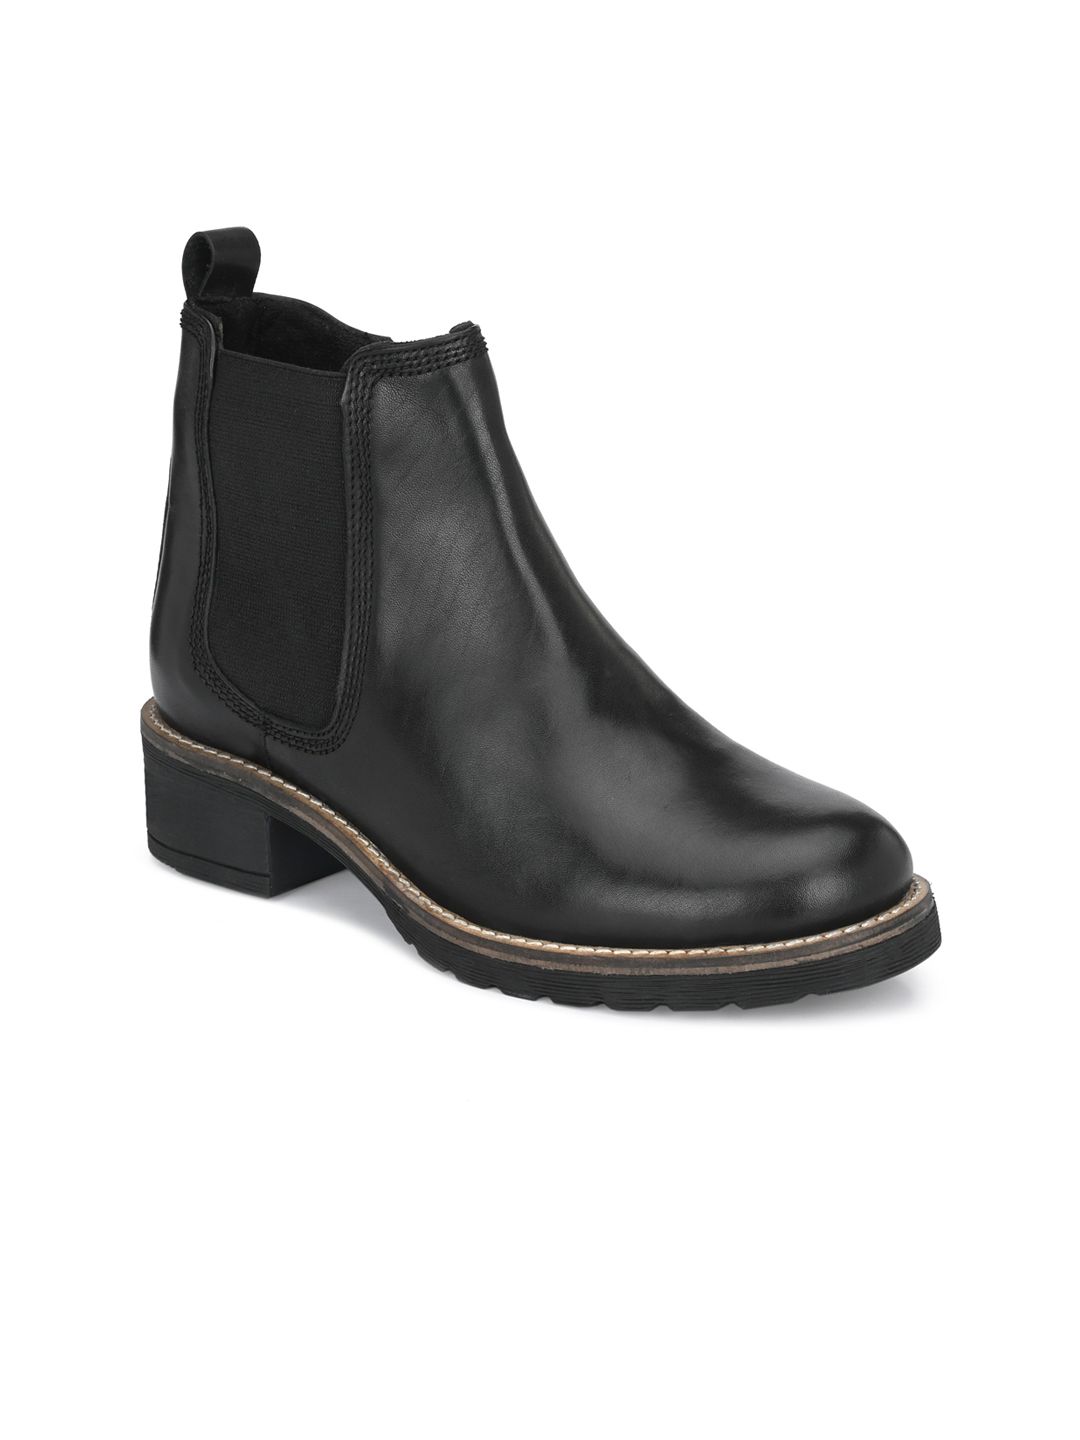 Delize Black Leather Block Heeled Boots Price in India